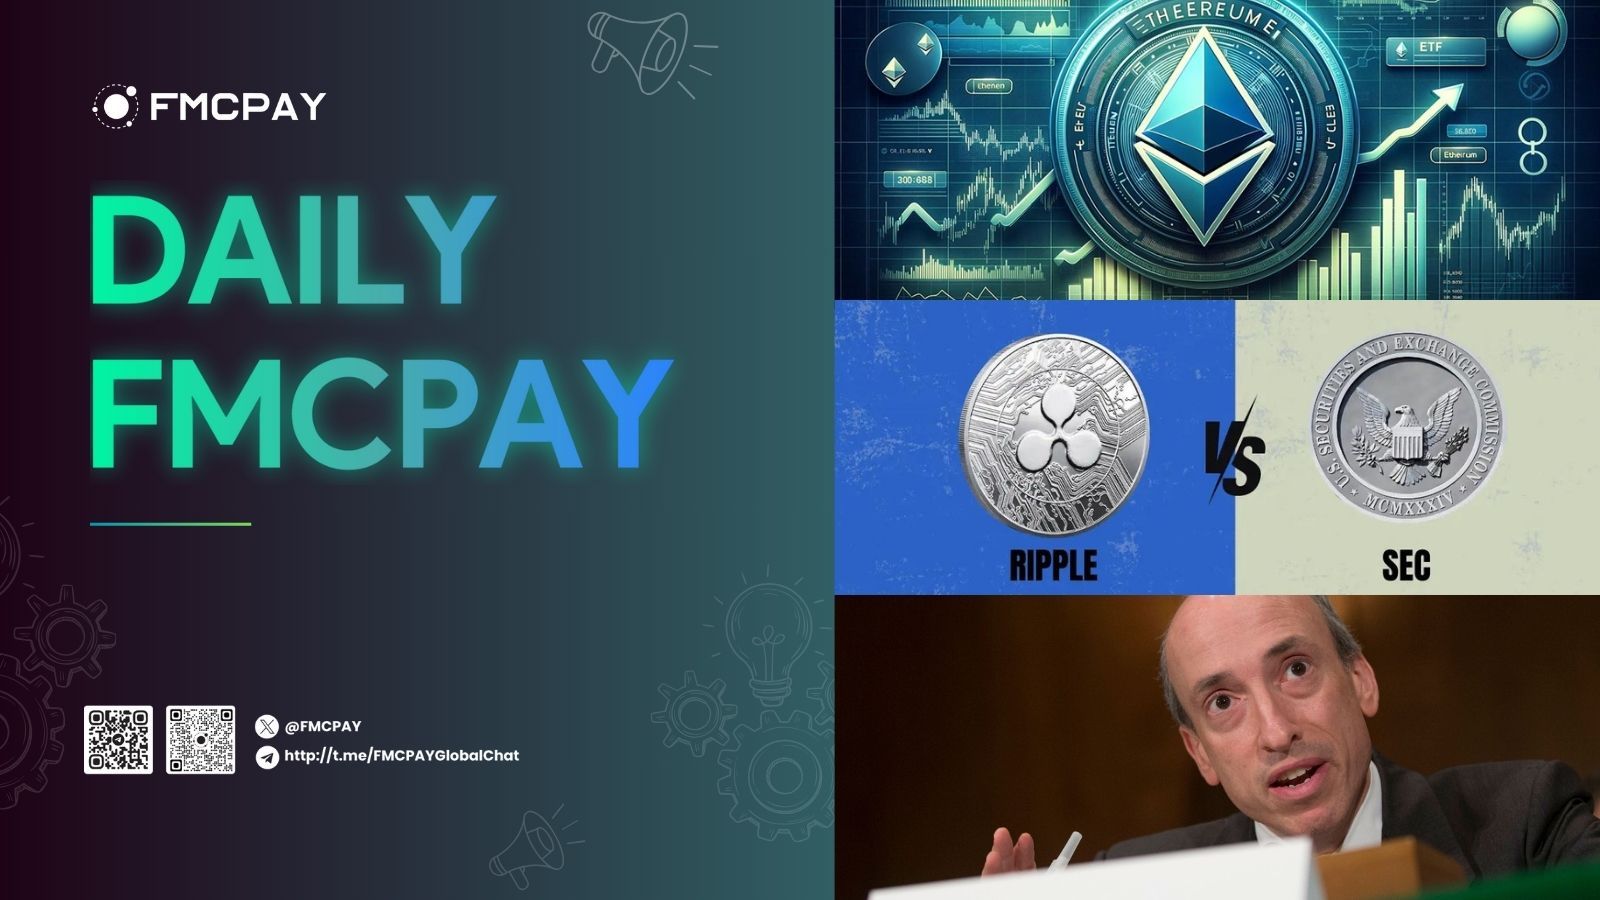 fmcpay ethereum permanent holders scoop 298k eth in a day eth price rally soon